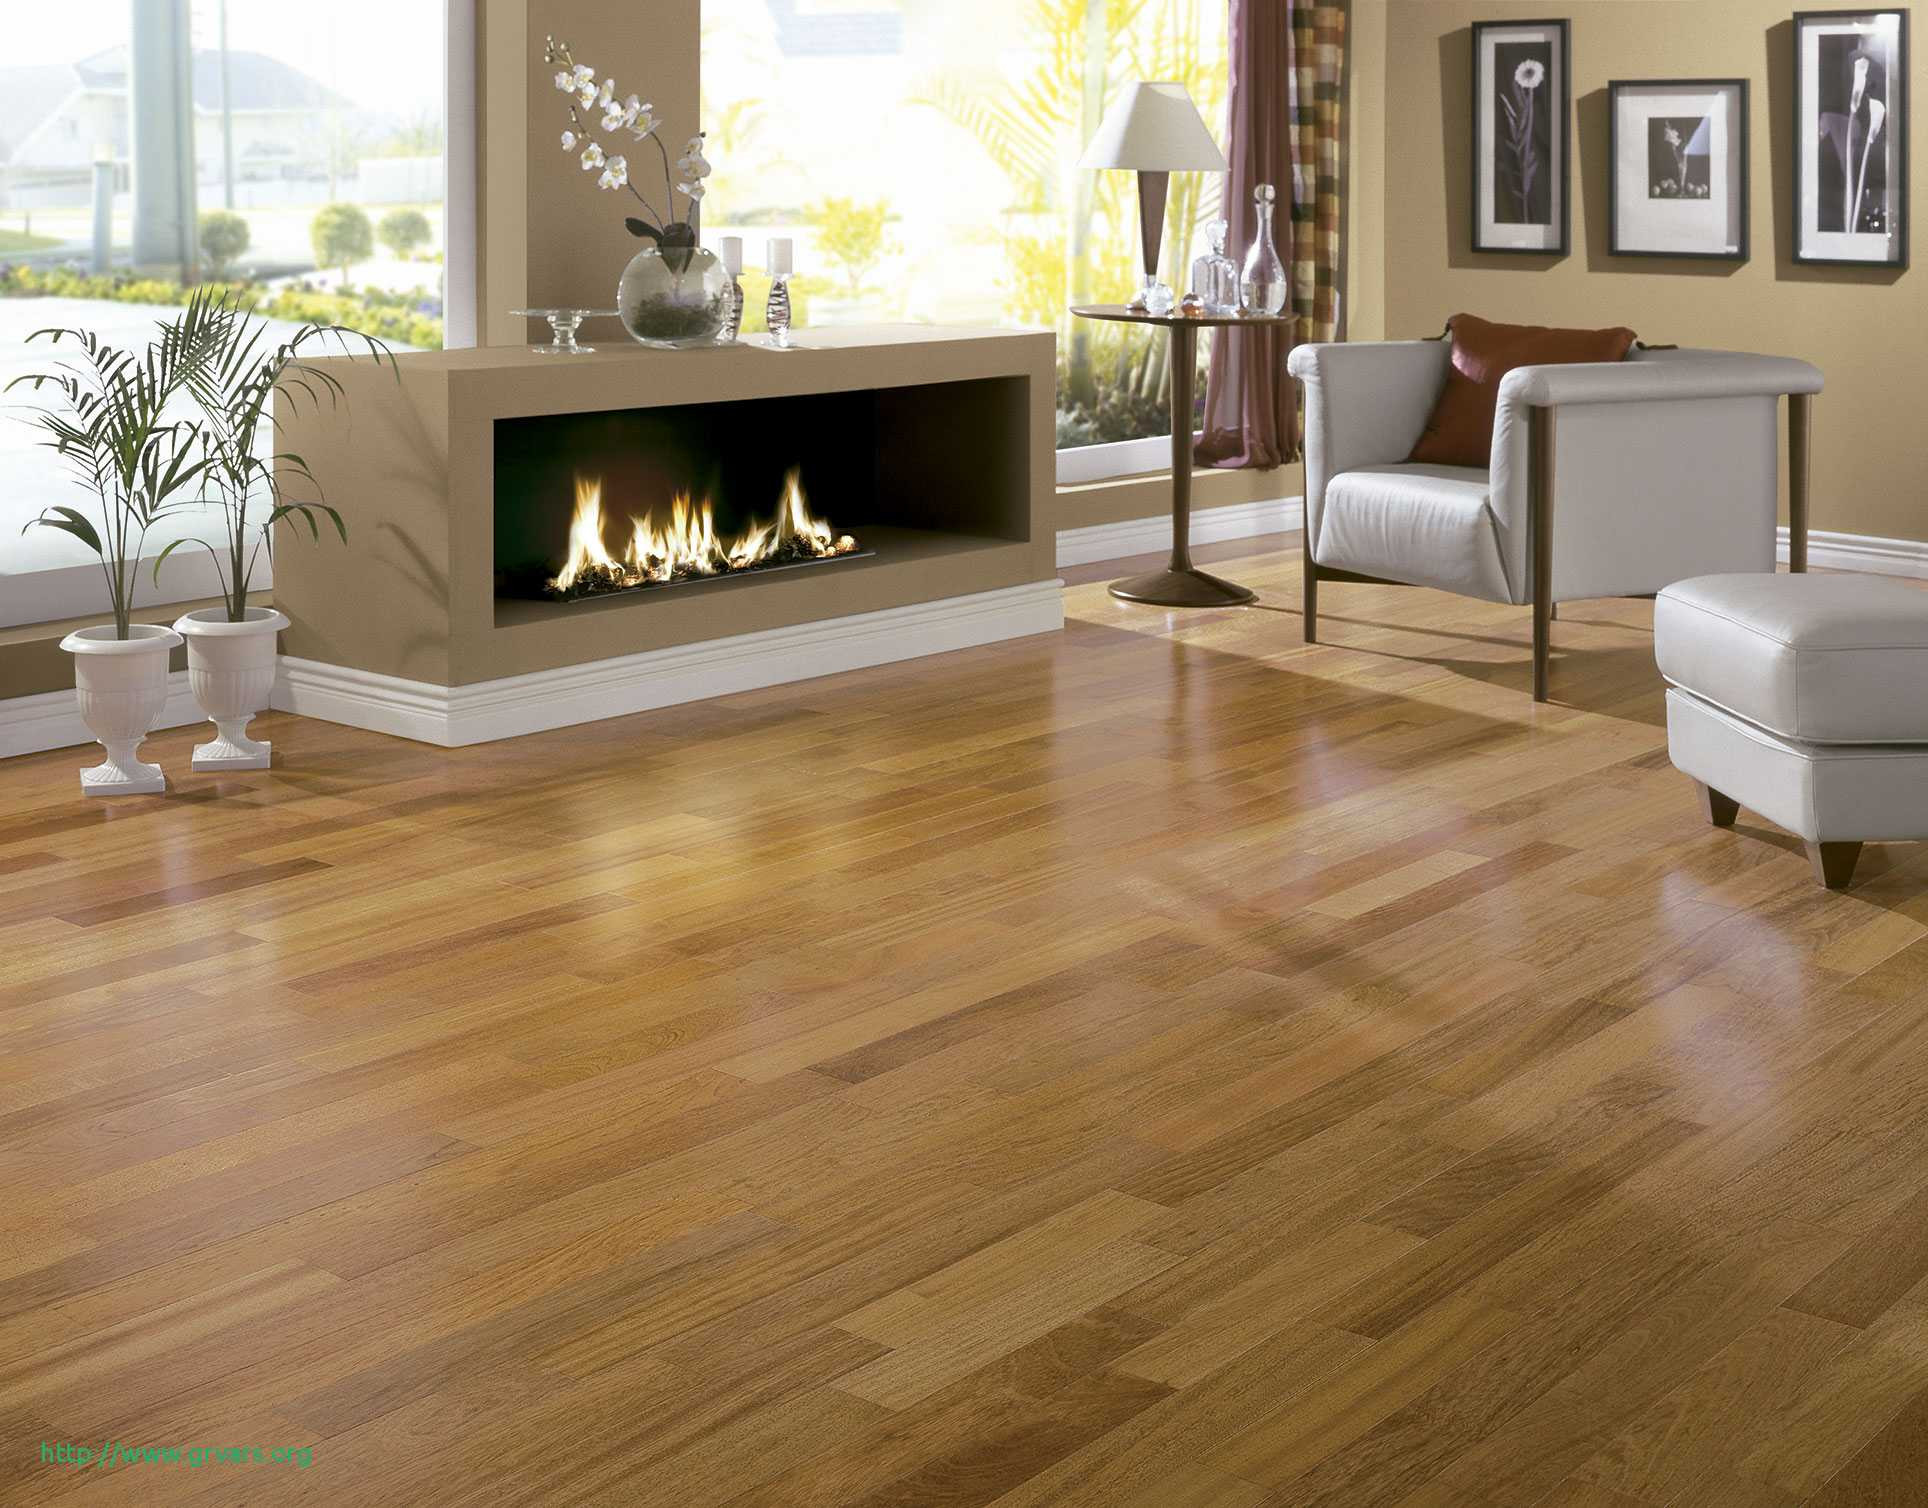 18 attractive Pictures Of Hardwood Floors 2024 free download pictures of hardwood floors of difference in hardwood floors charmant engaging discount hardwood with regard to difference in hardwood floors charmant engaging discount hardwood flooring 5 w